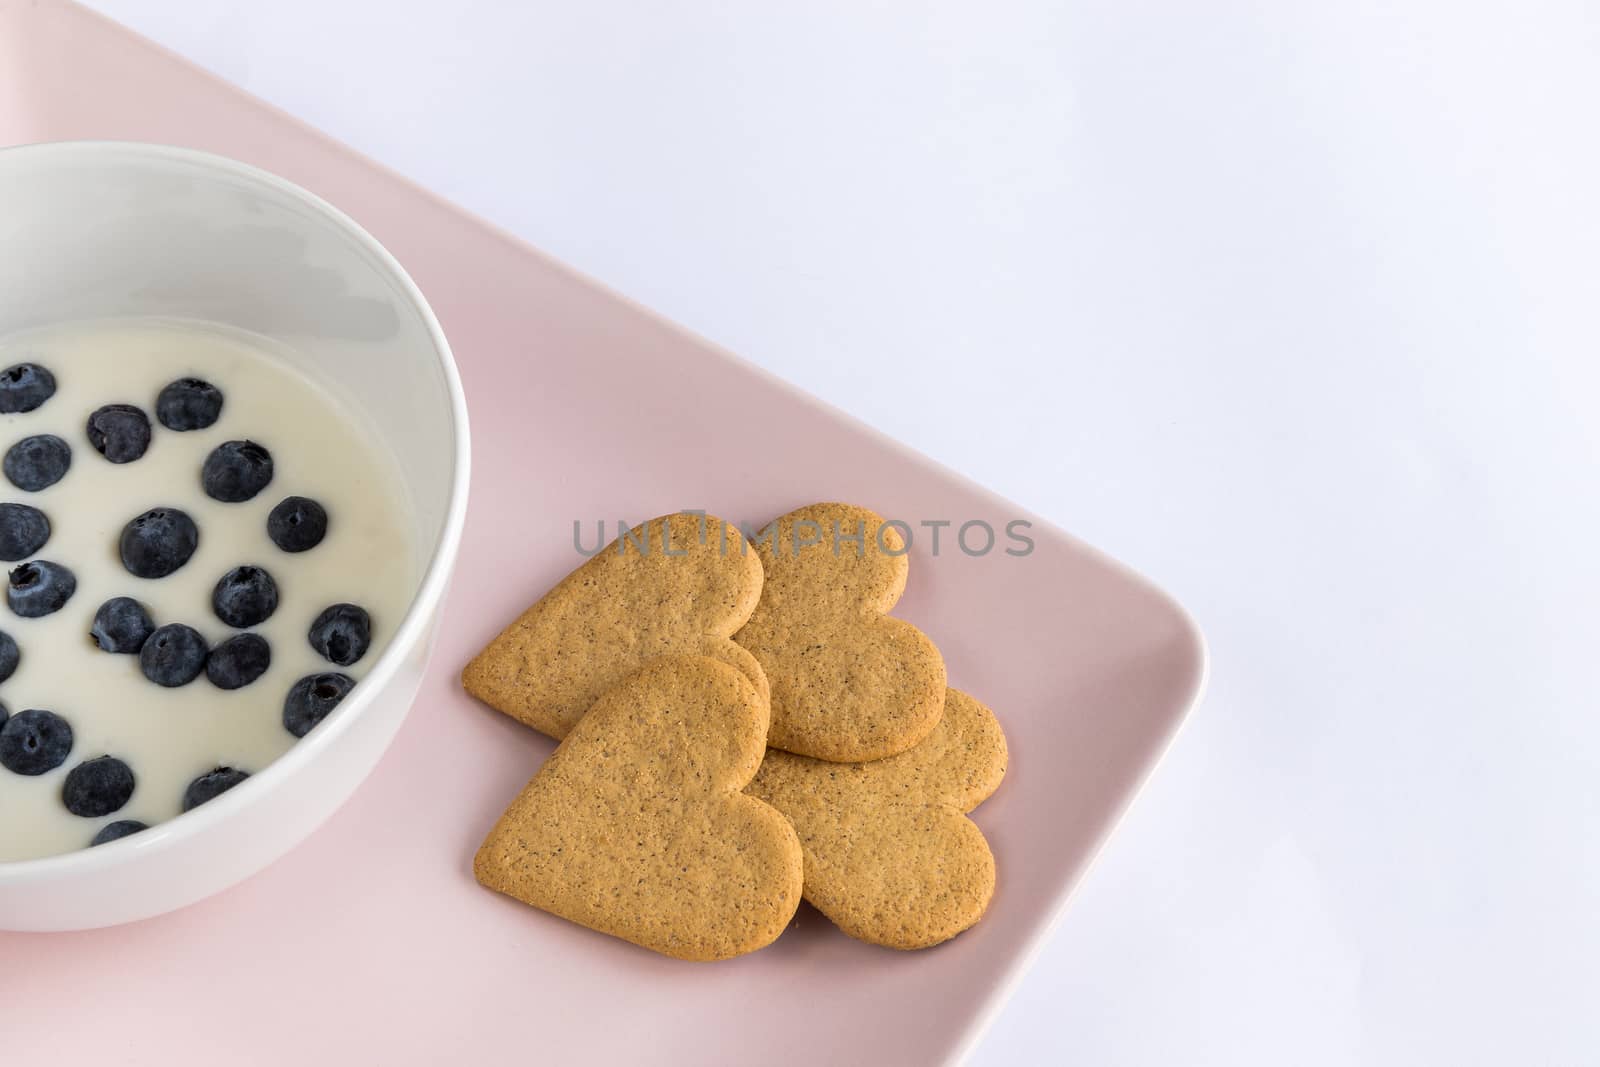 Breakfast. Yogurt with blueberries heart shaped cookies. Ingredients in a pink tray on a white background. Detail from above with copy space. Top view.